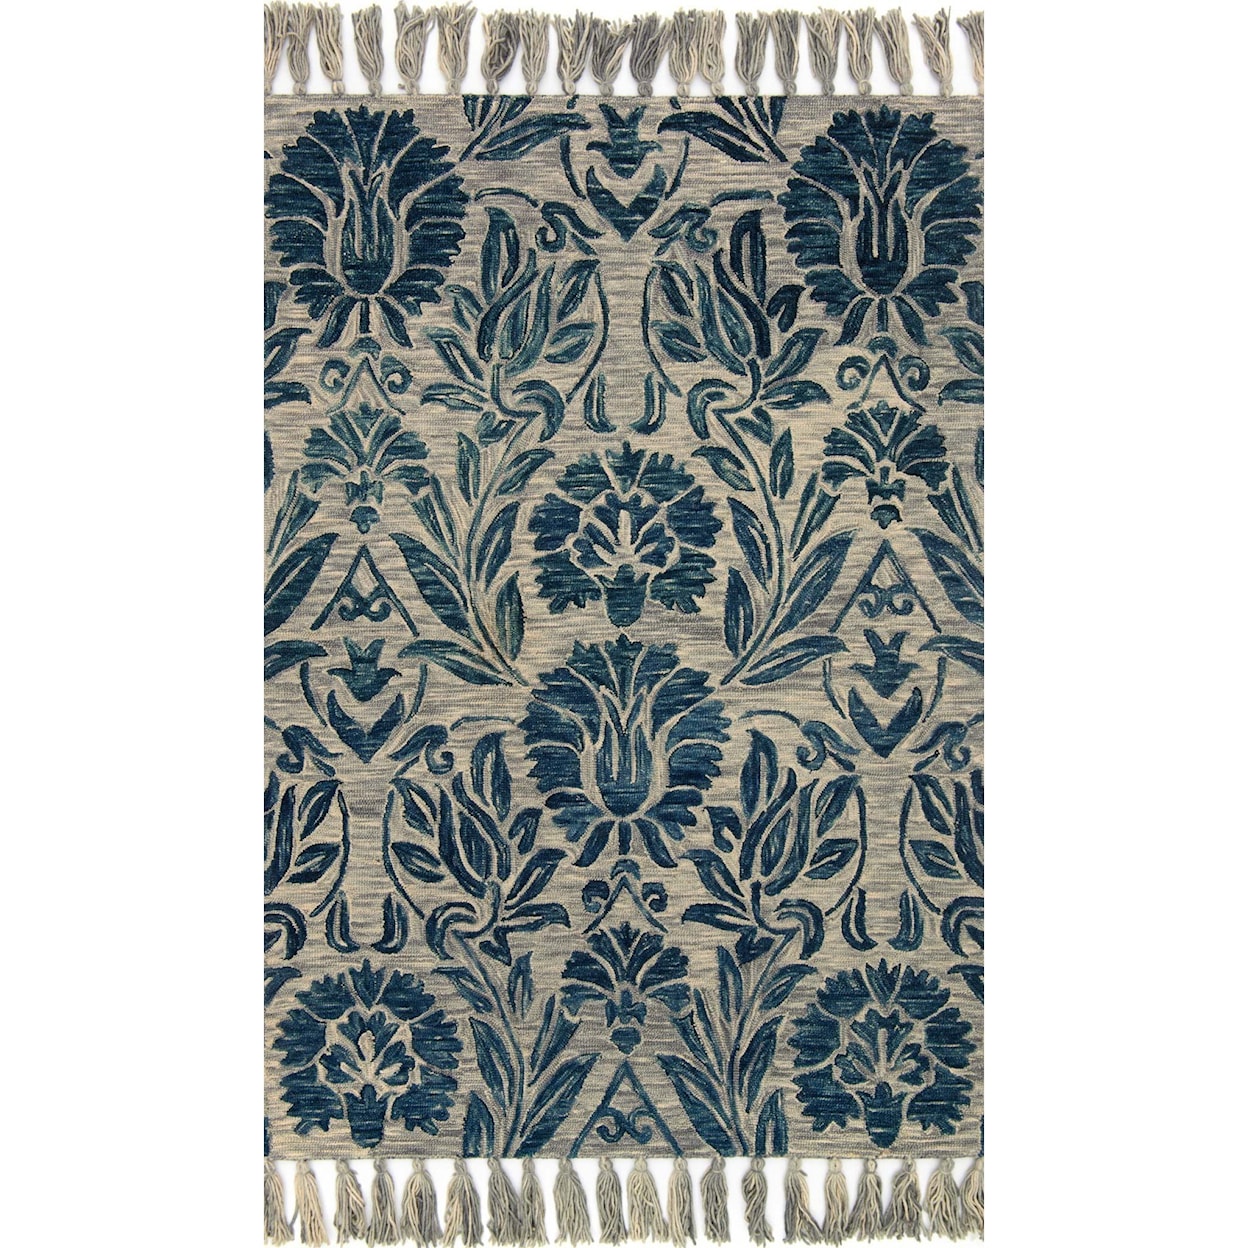 Magnolia Home by Joanna Gaines for Loloi Jozie Day 3' 6" x 5' 6" Rectangle Rug